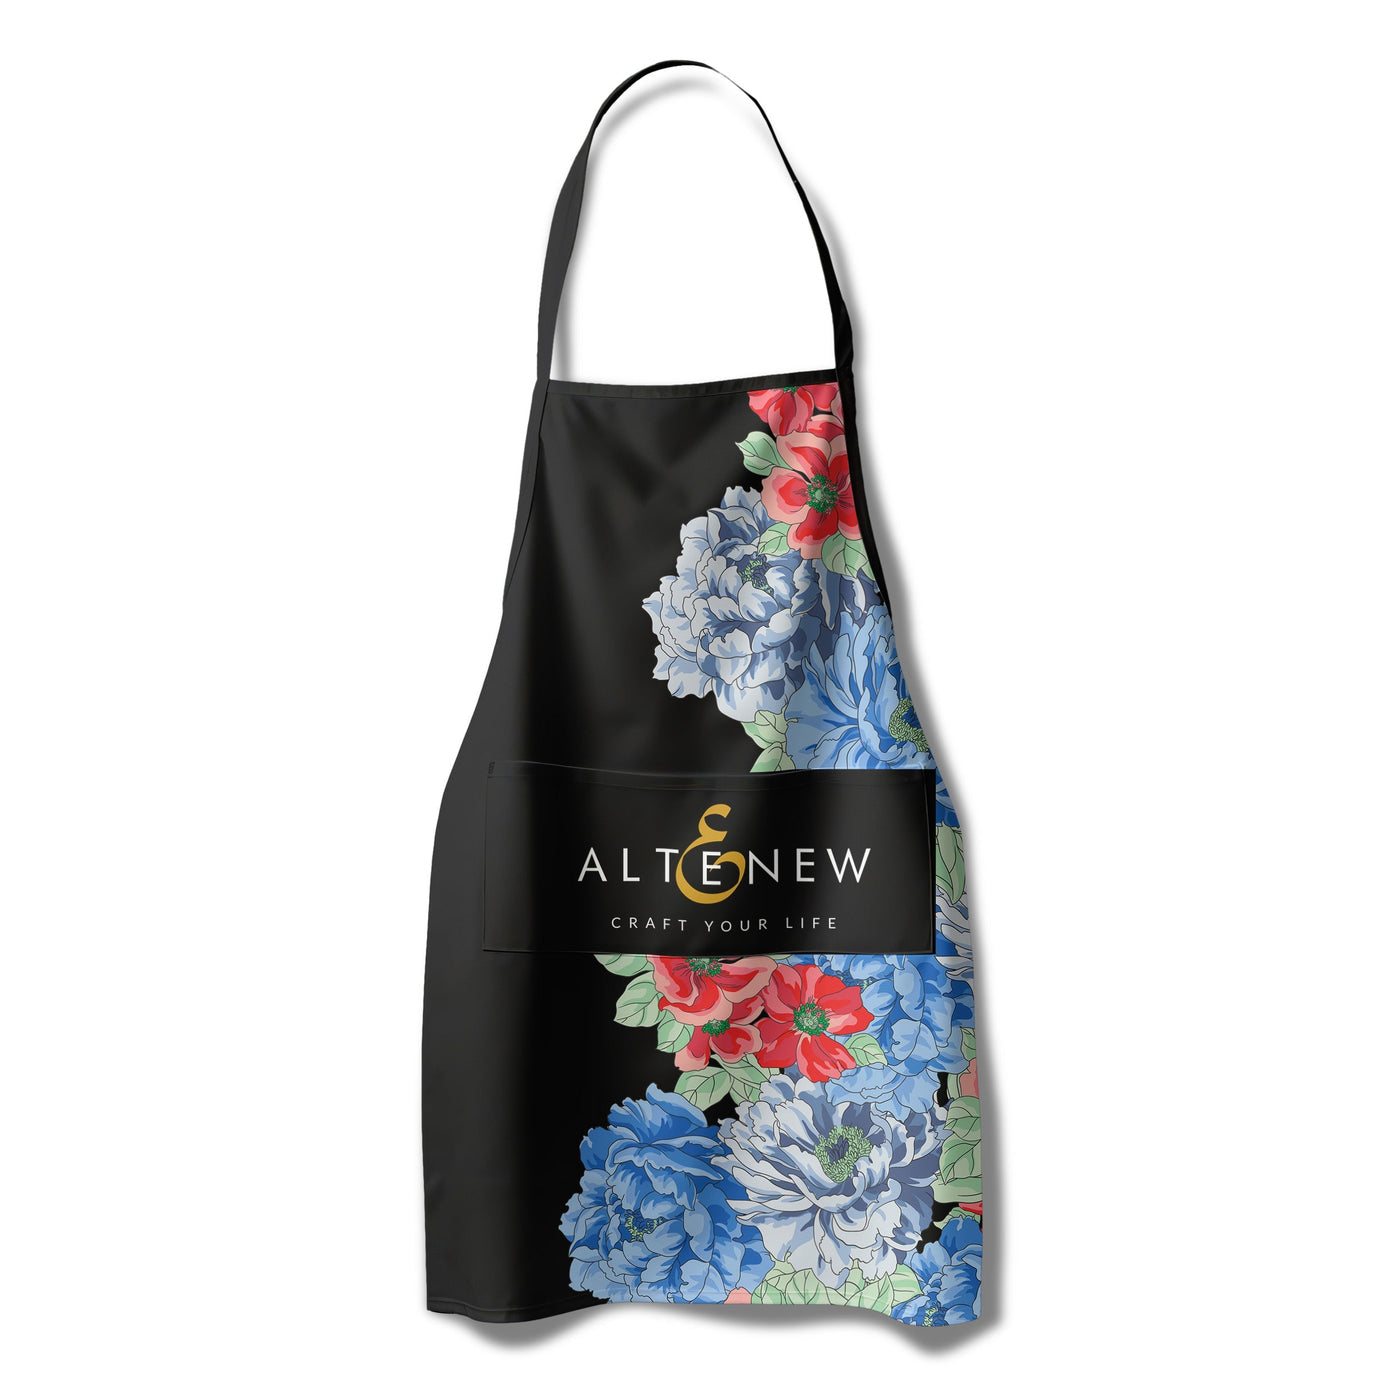 Stationery & Gifts Artsy Apron: Red & Blue Billowing Peonies - Black